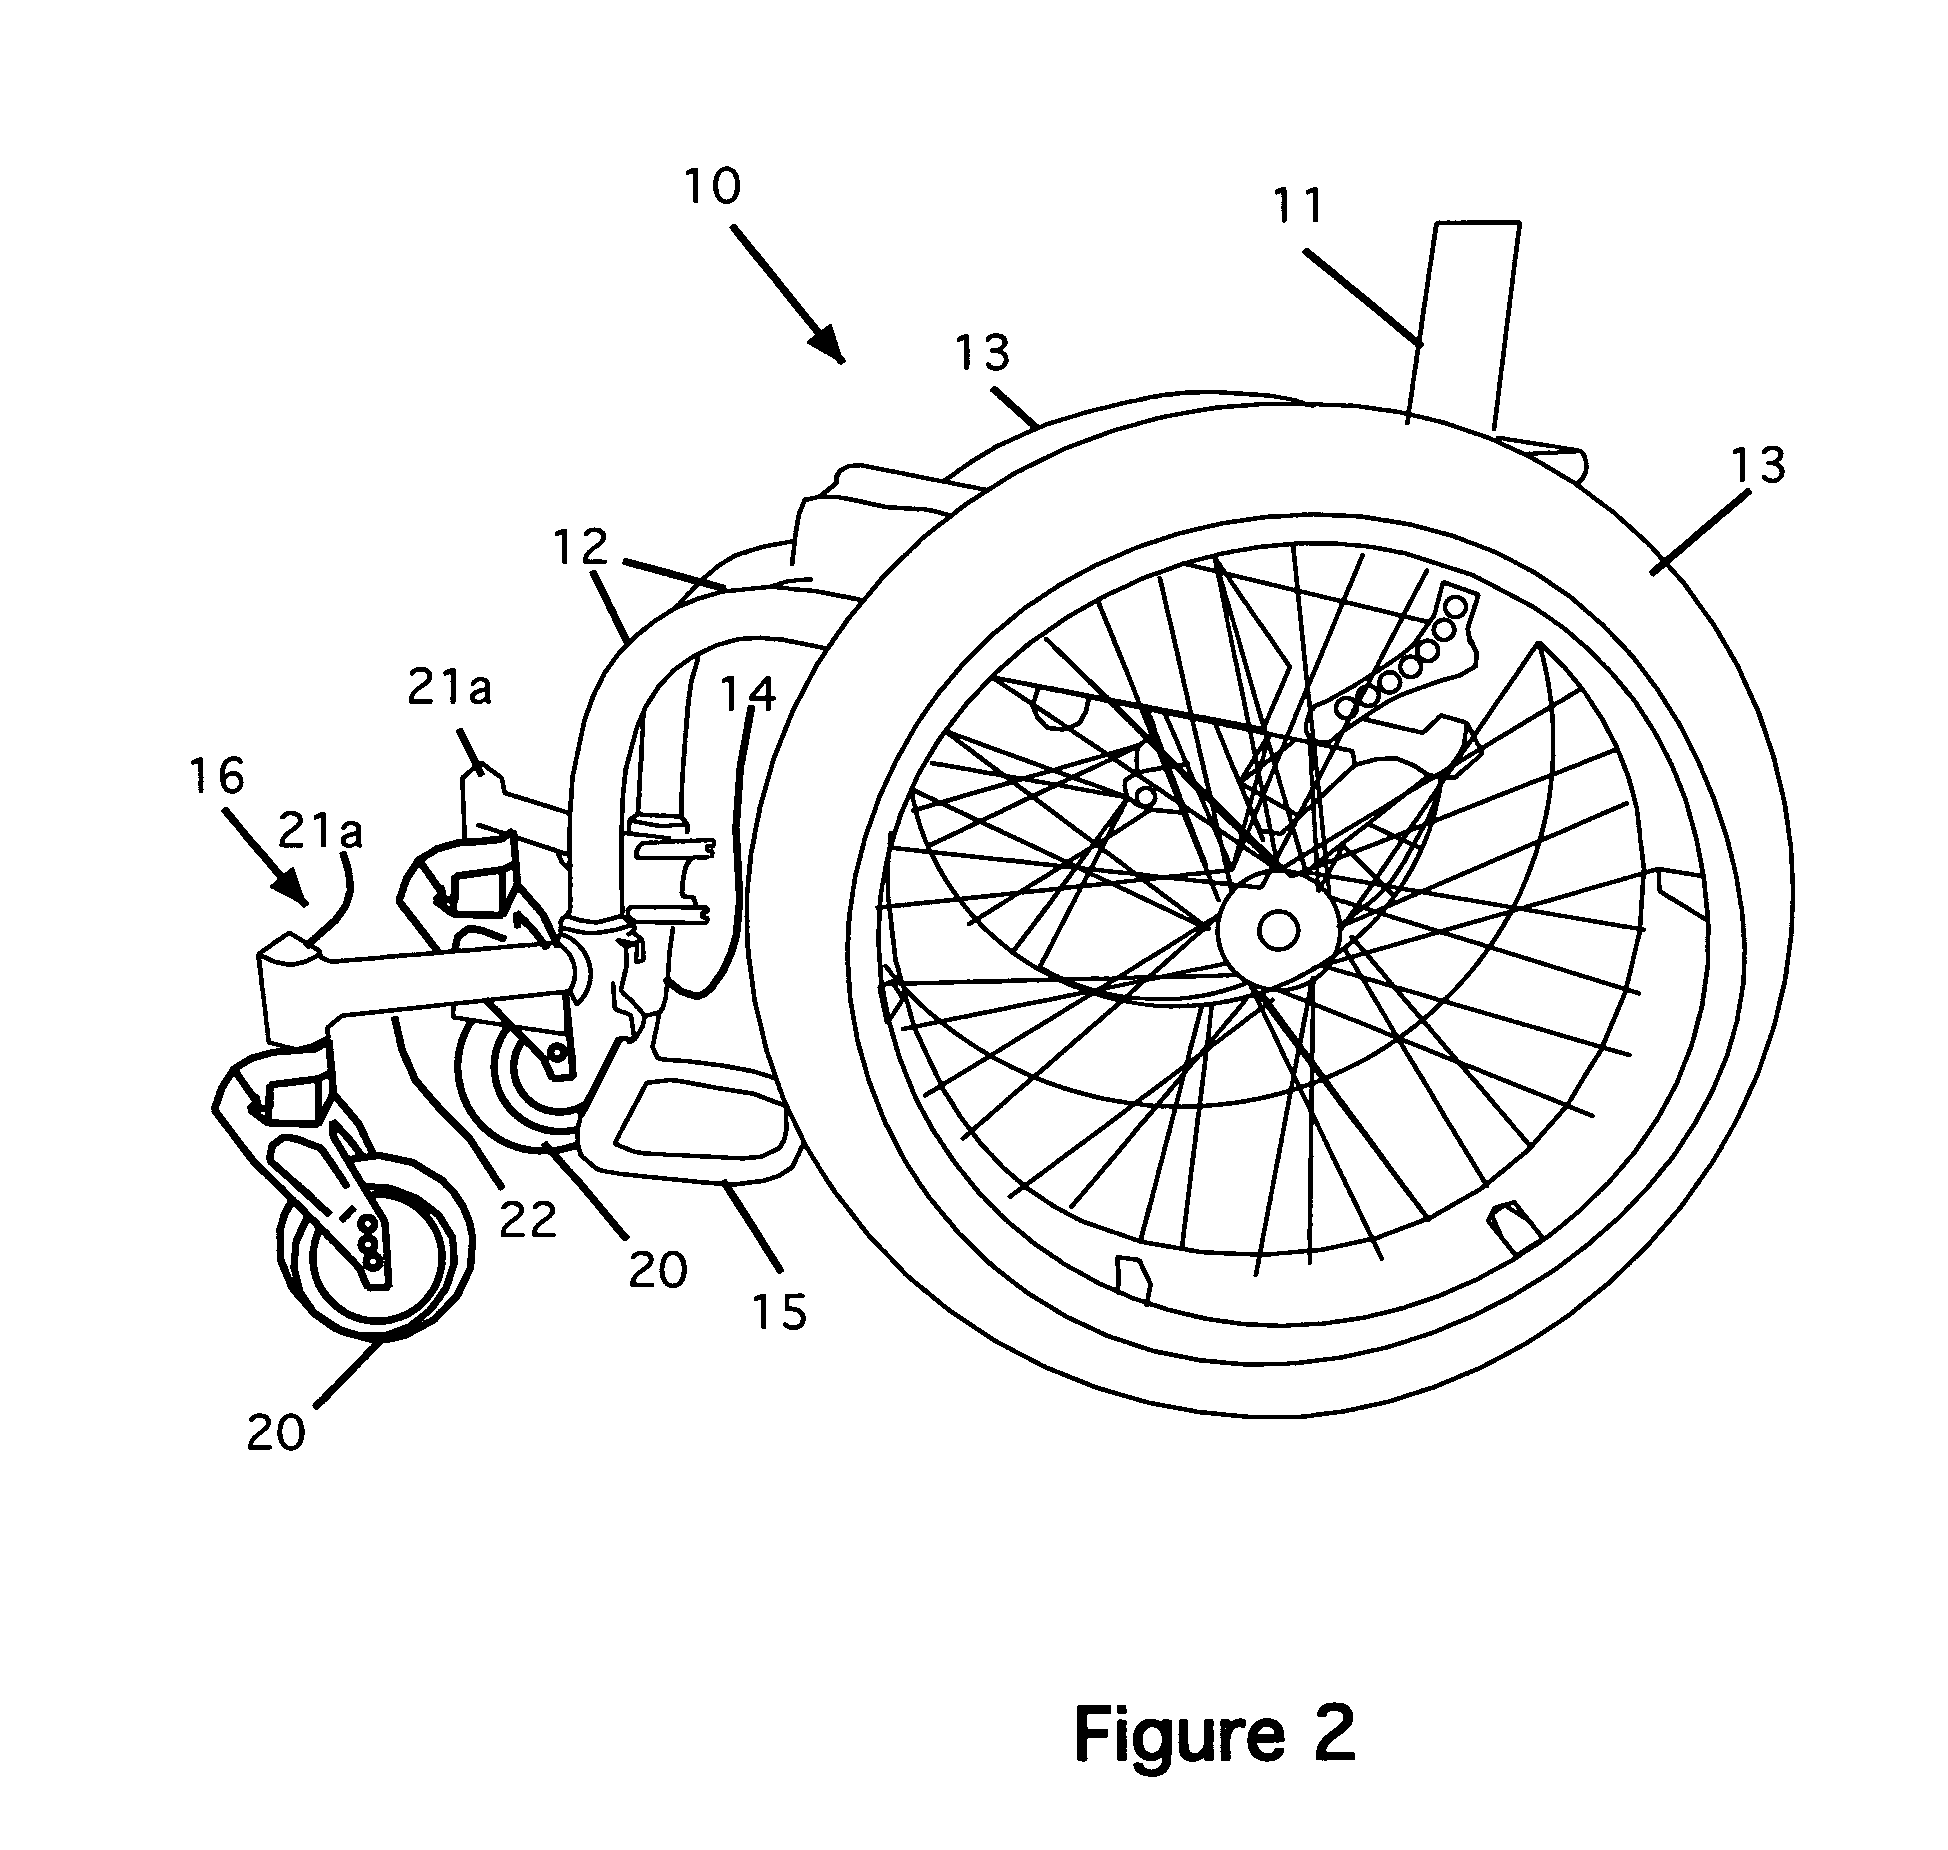 Wheelchair with easily changeable wheel sets